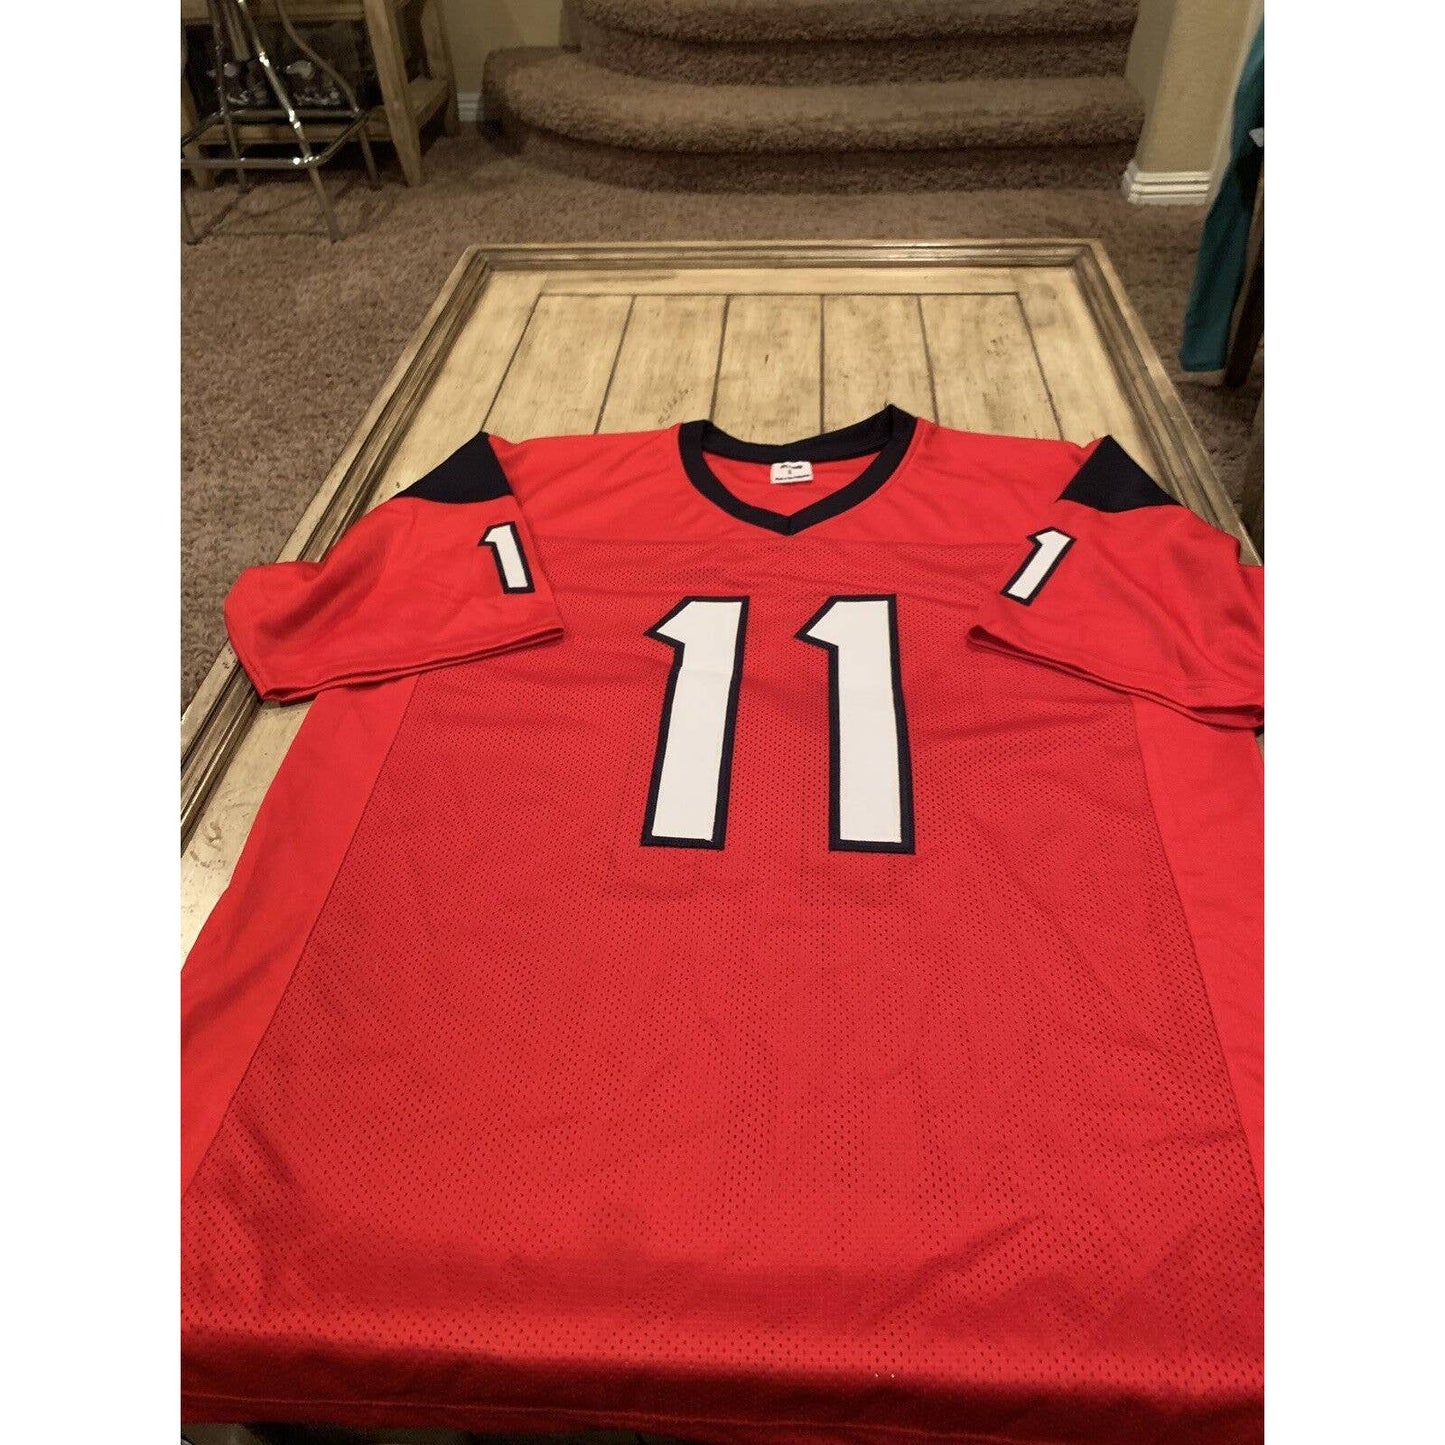 Jaelen Strong Autographed/Signed Jersey TRISTAR Houston Texans